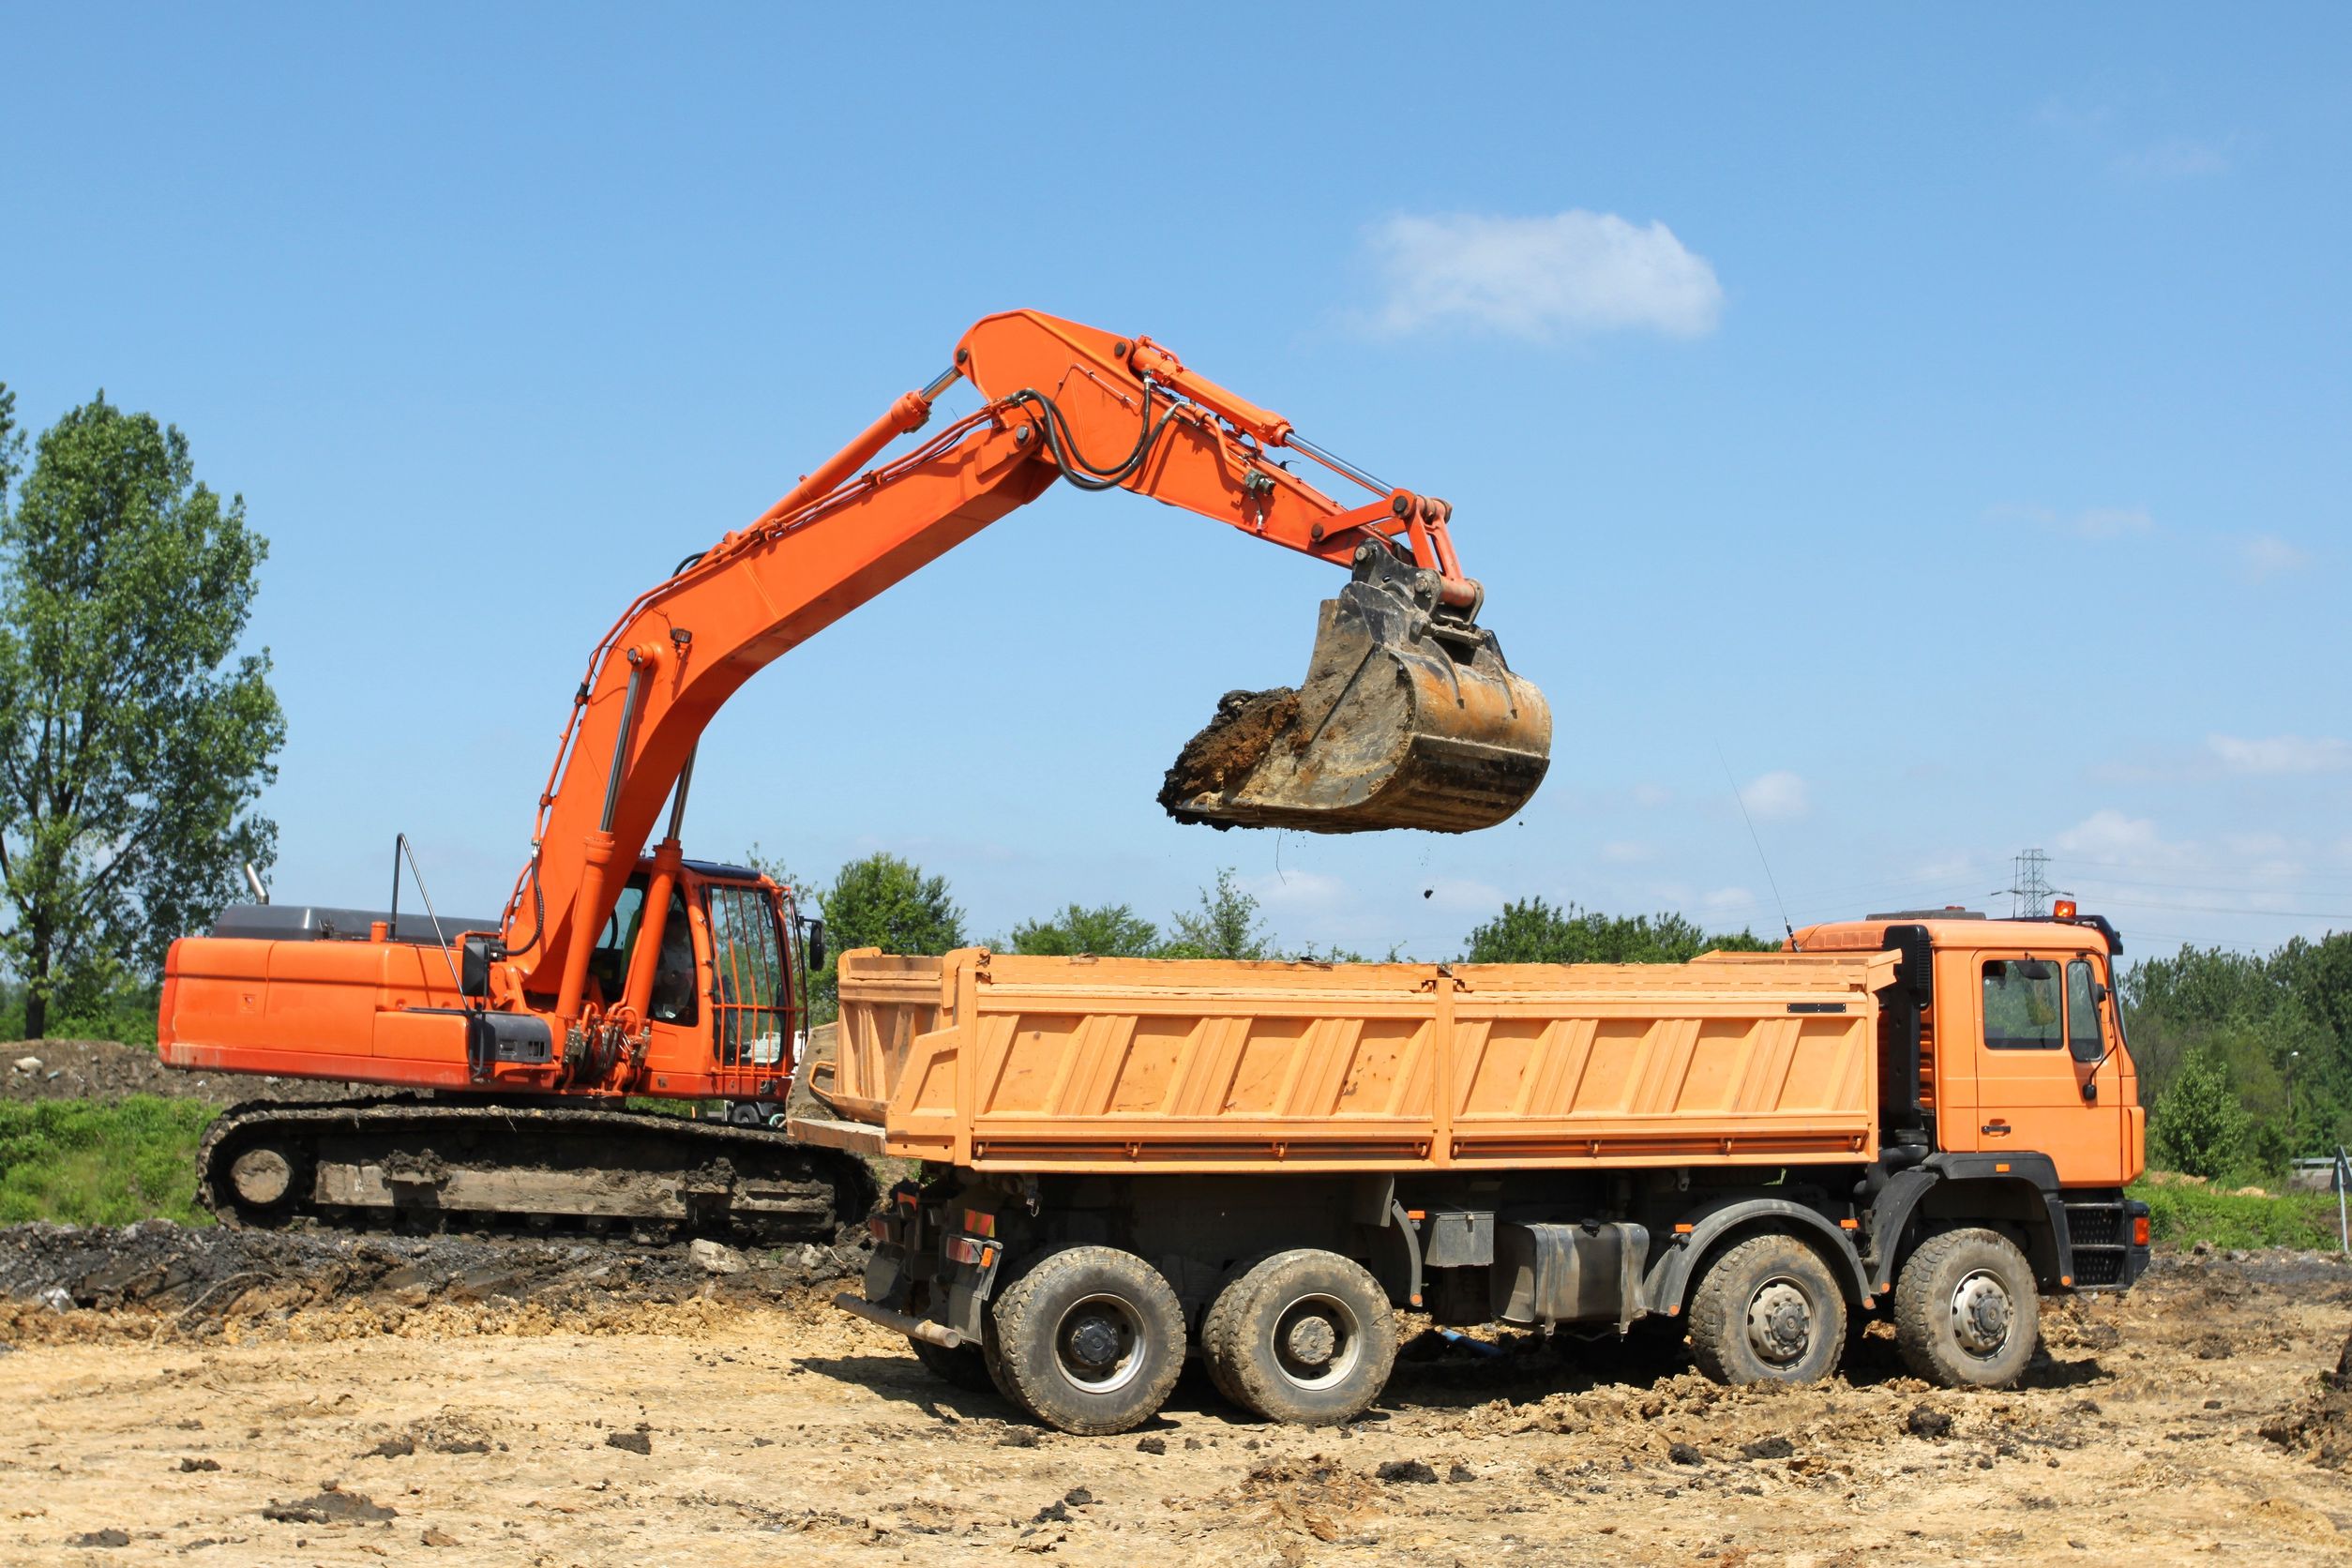 Getting a Mini Excavator Rental in Atchison, KS for Your Next Project